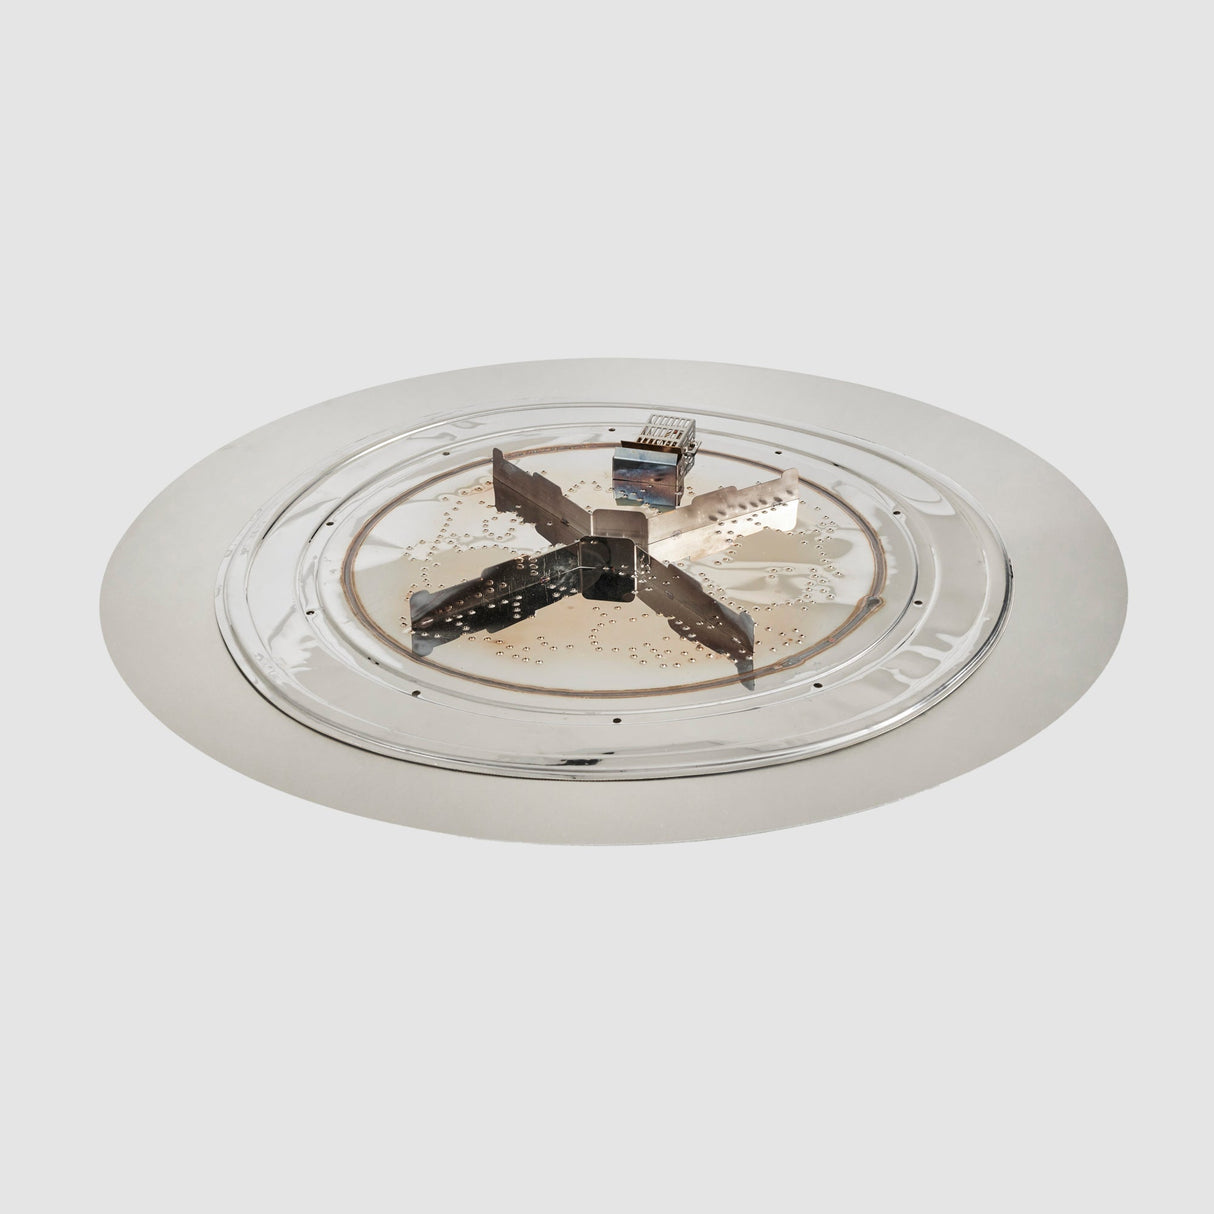 The 36" Crystal Fire Plus Round Gas Burner Insert and Plate Kit on a grey background